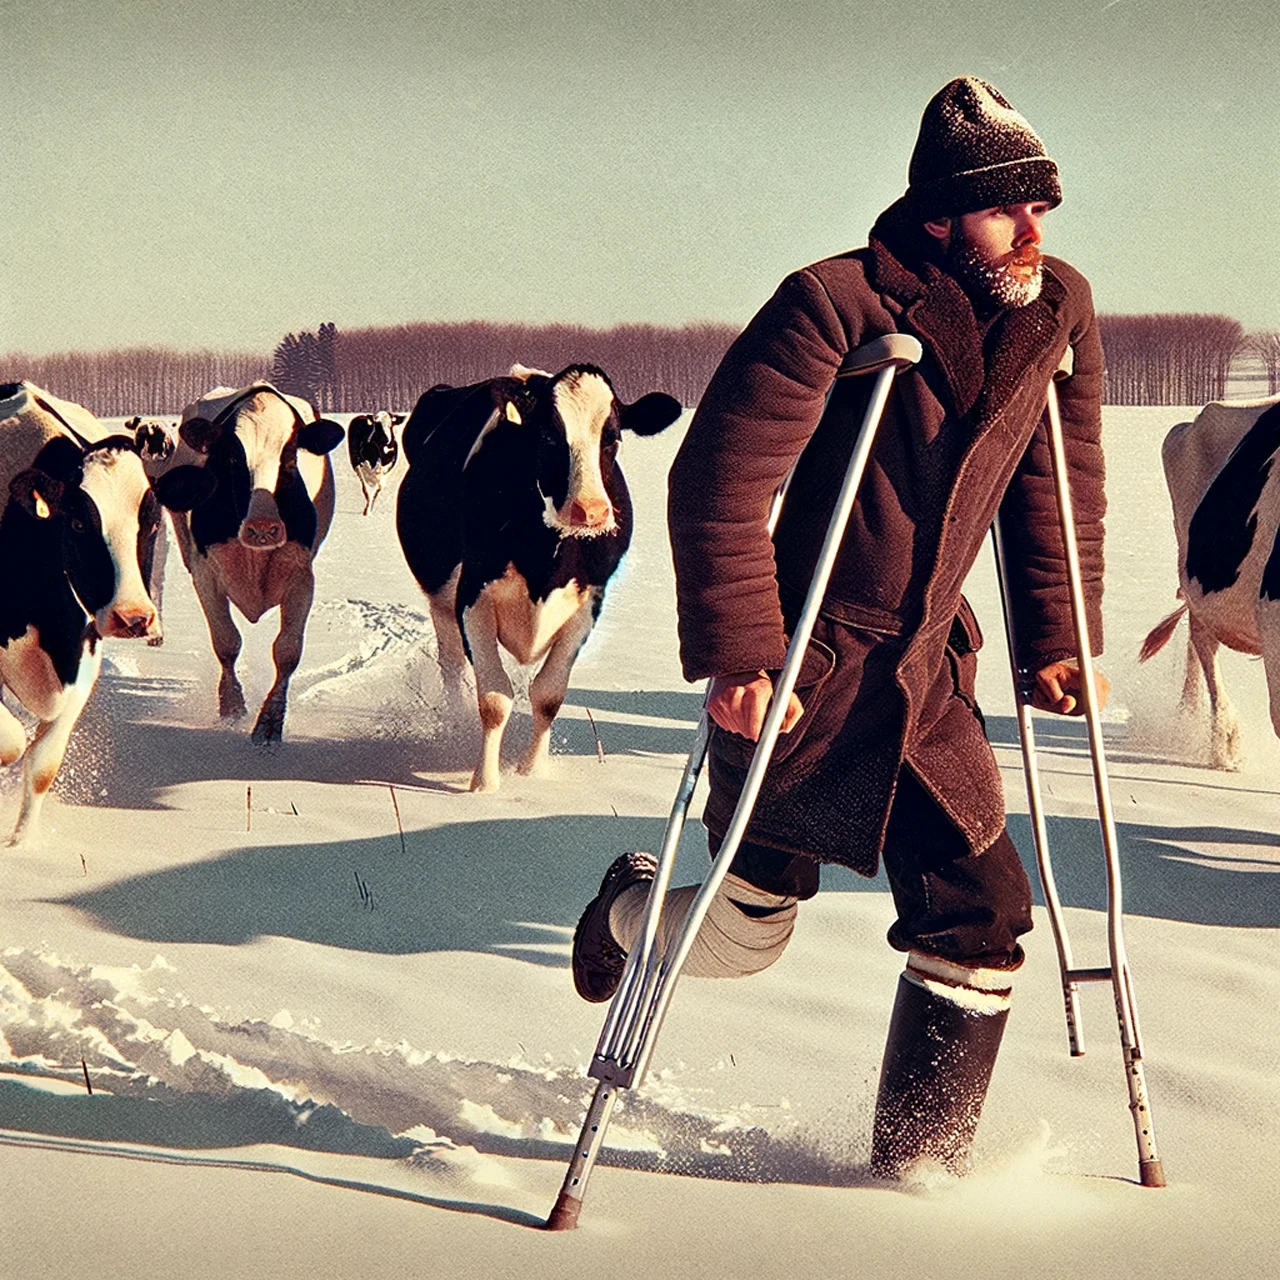 A photograph from the 1970's of a man bringing escaped cows back to their pen